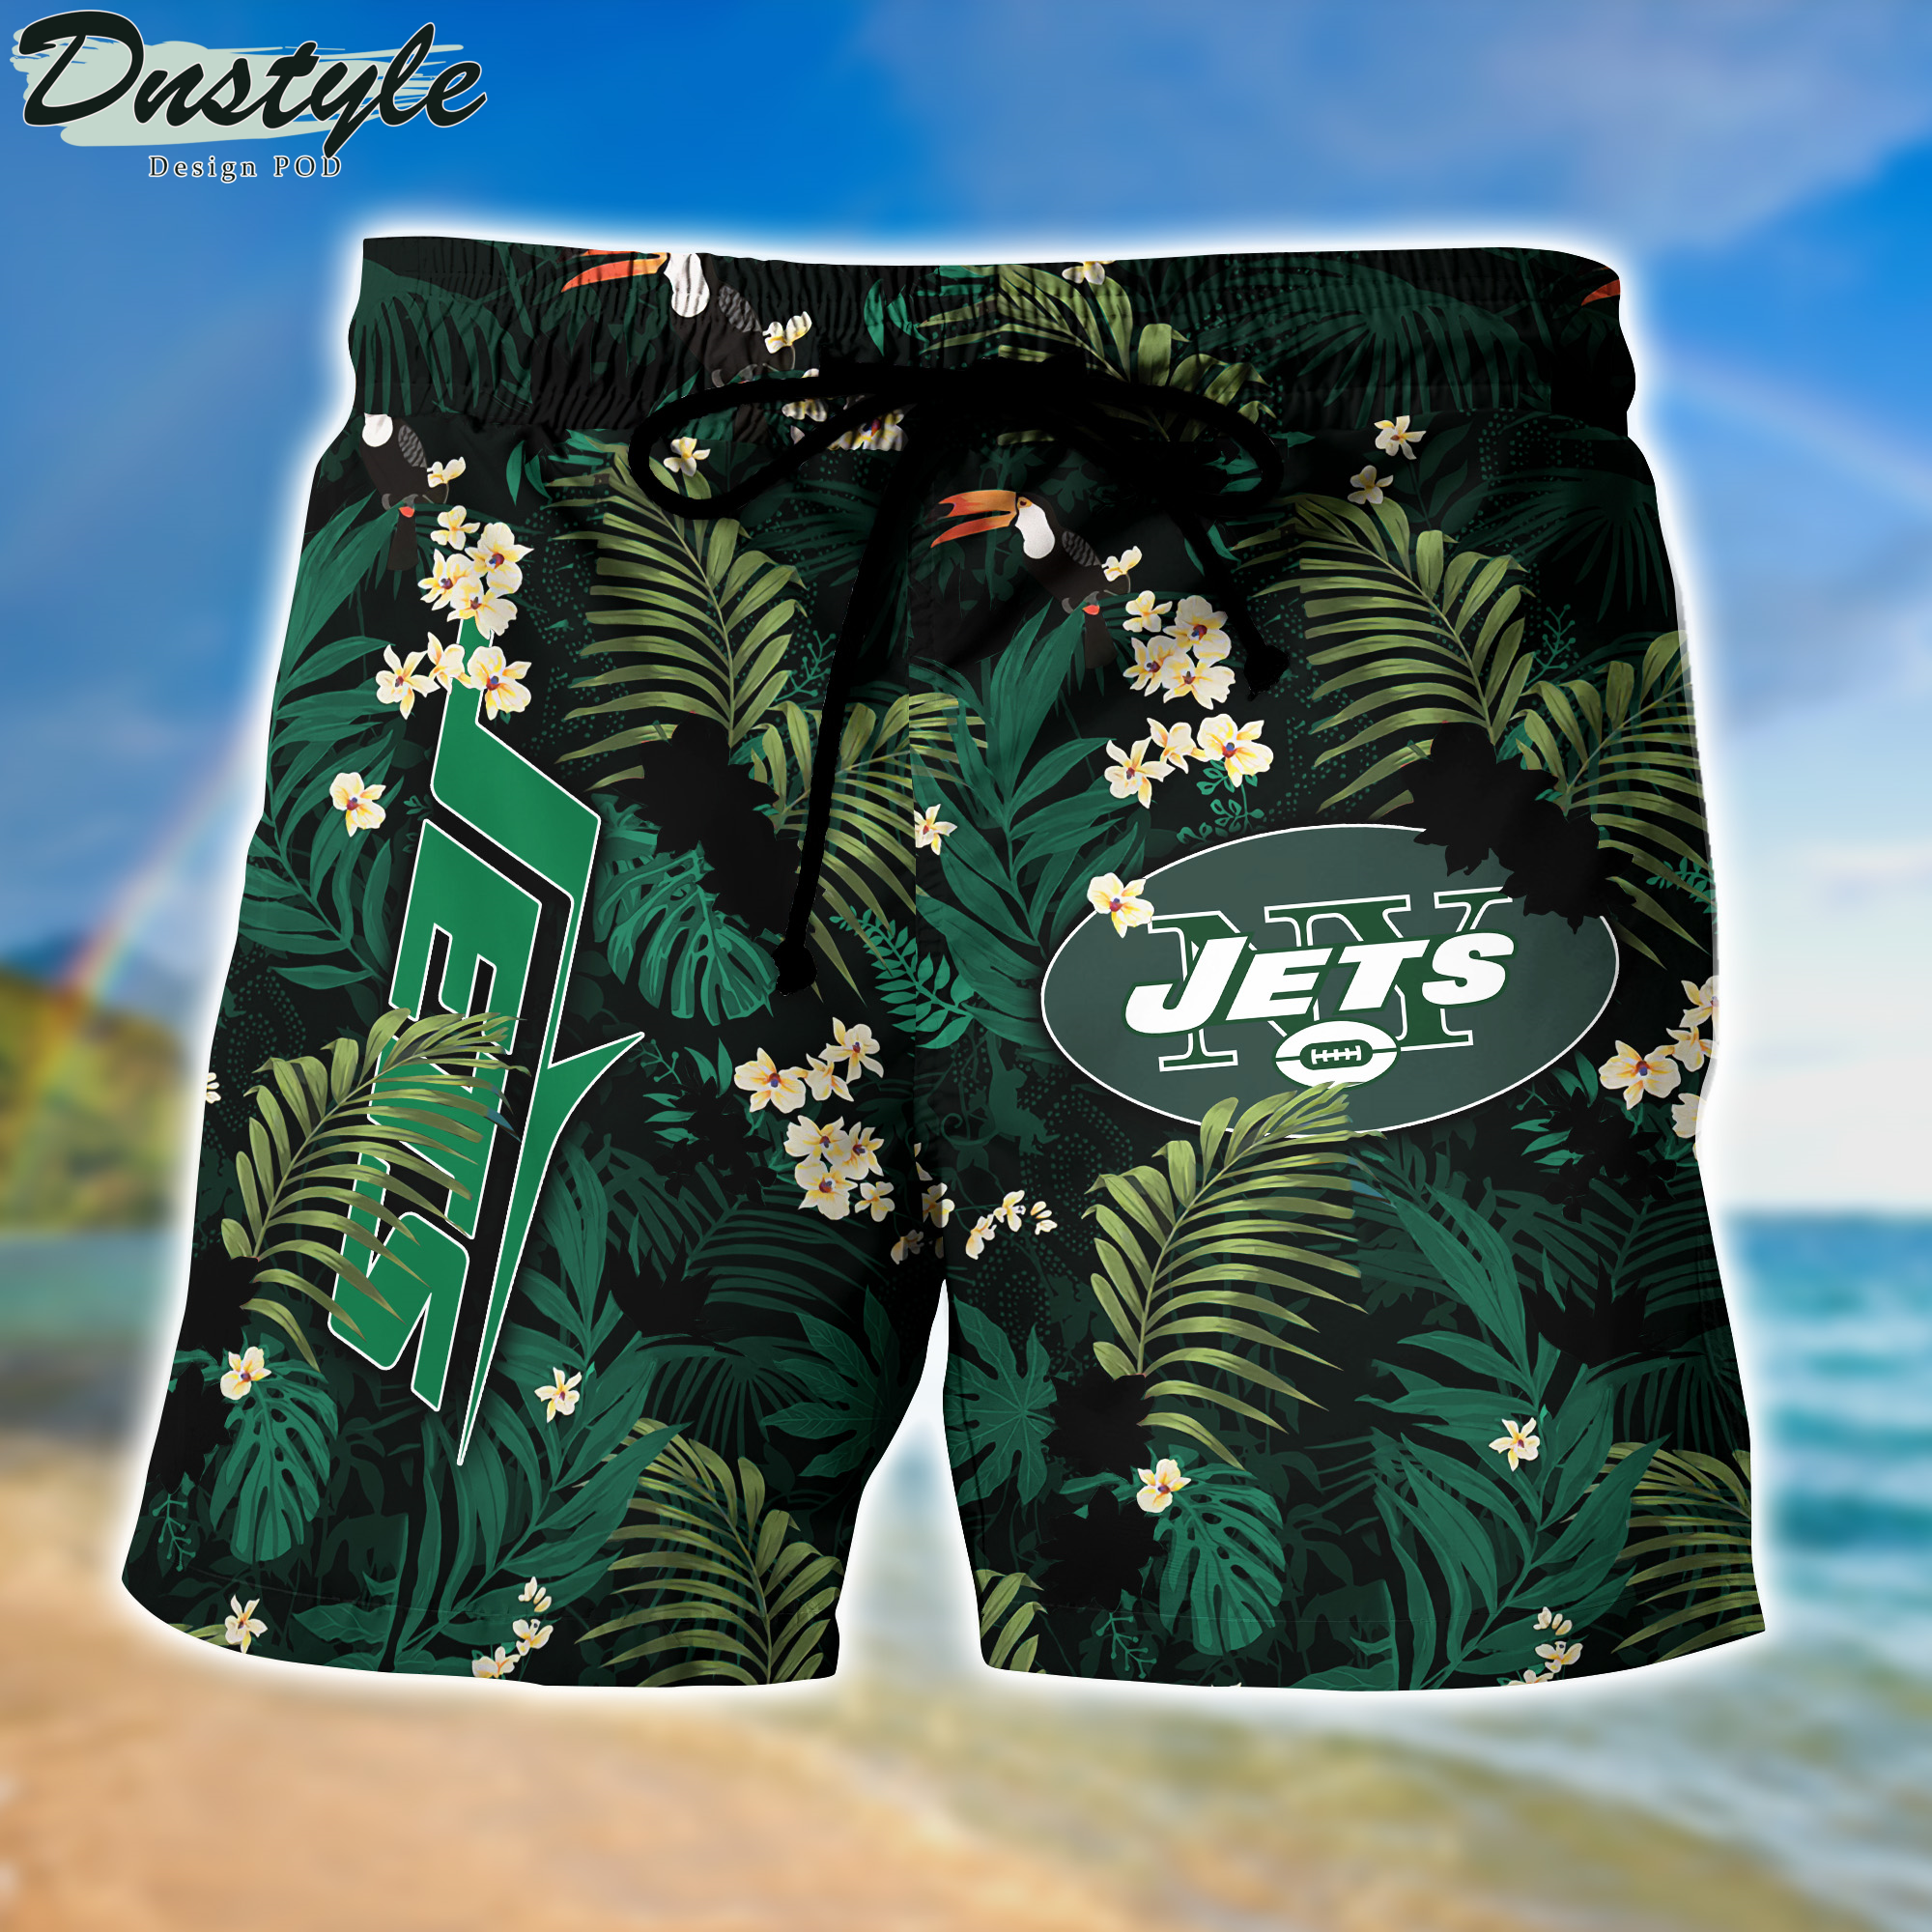 New York Jets Hawaii Shirt And Shorts New Collection